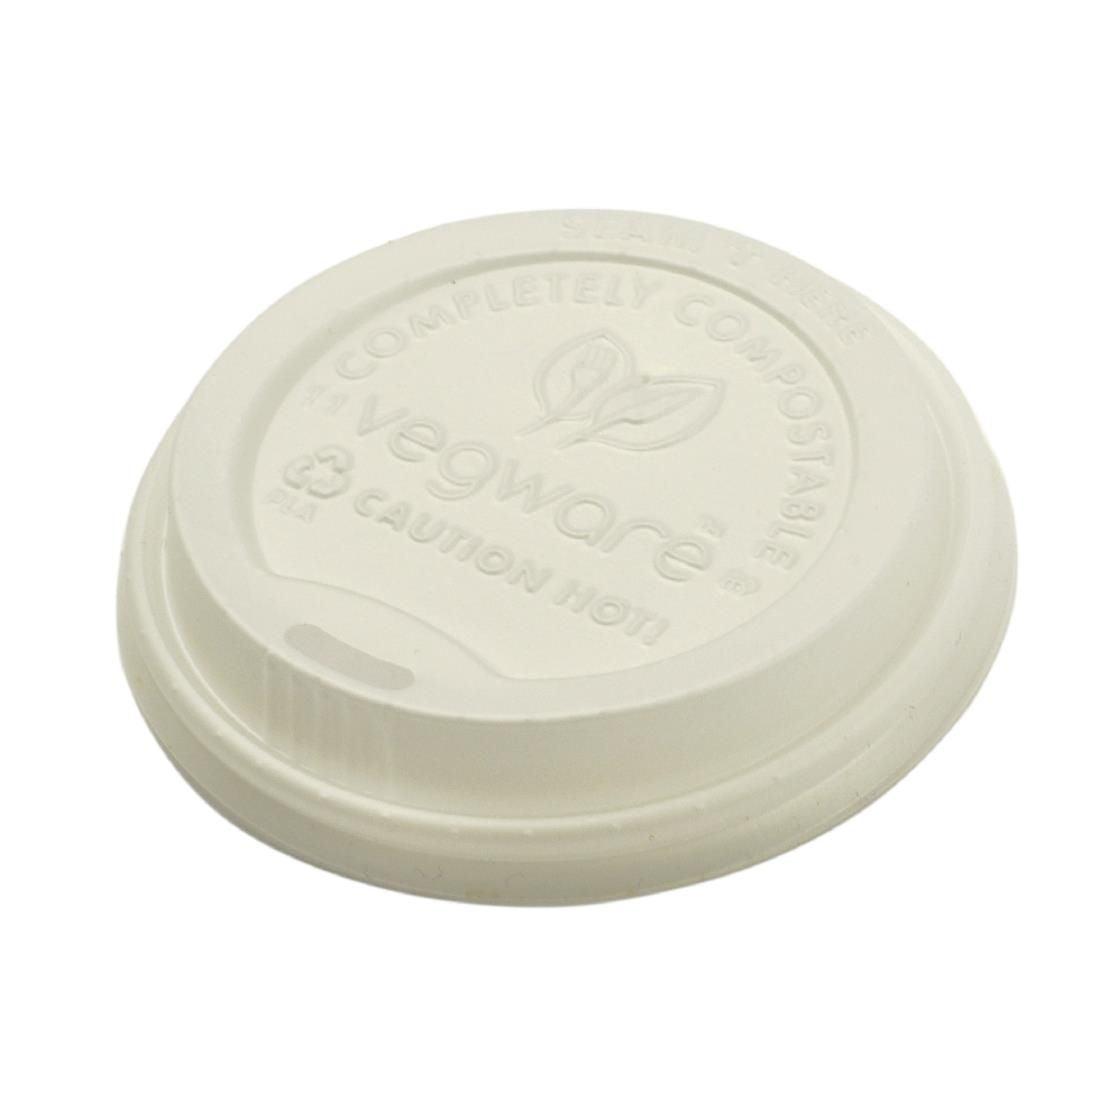 Vegware Compostable Coffee Cup Lids 225ml / 8oz (Pack of 1000) - GH024 Disposable Cups Vegware   